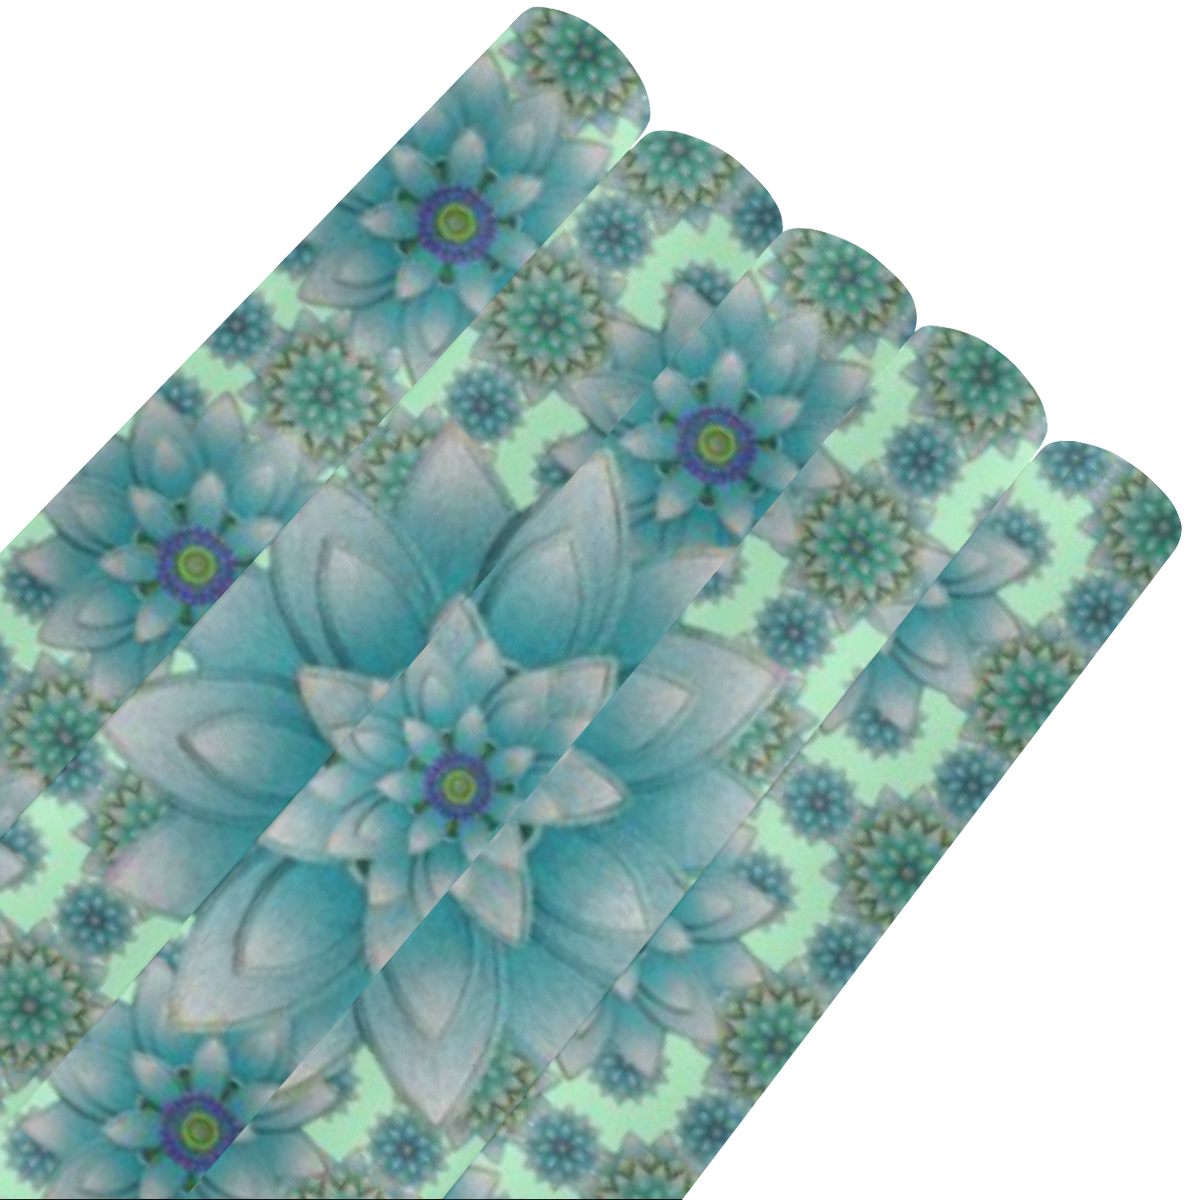 Happiness Turquoise Lotus pattern Gift Wrapping Paper 58"x 23" (5 Rolls)